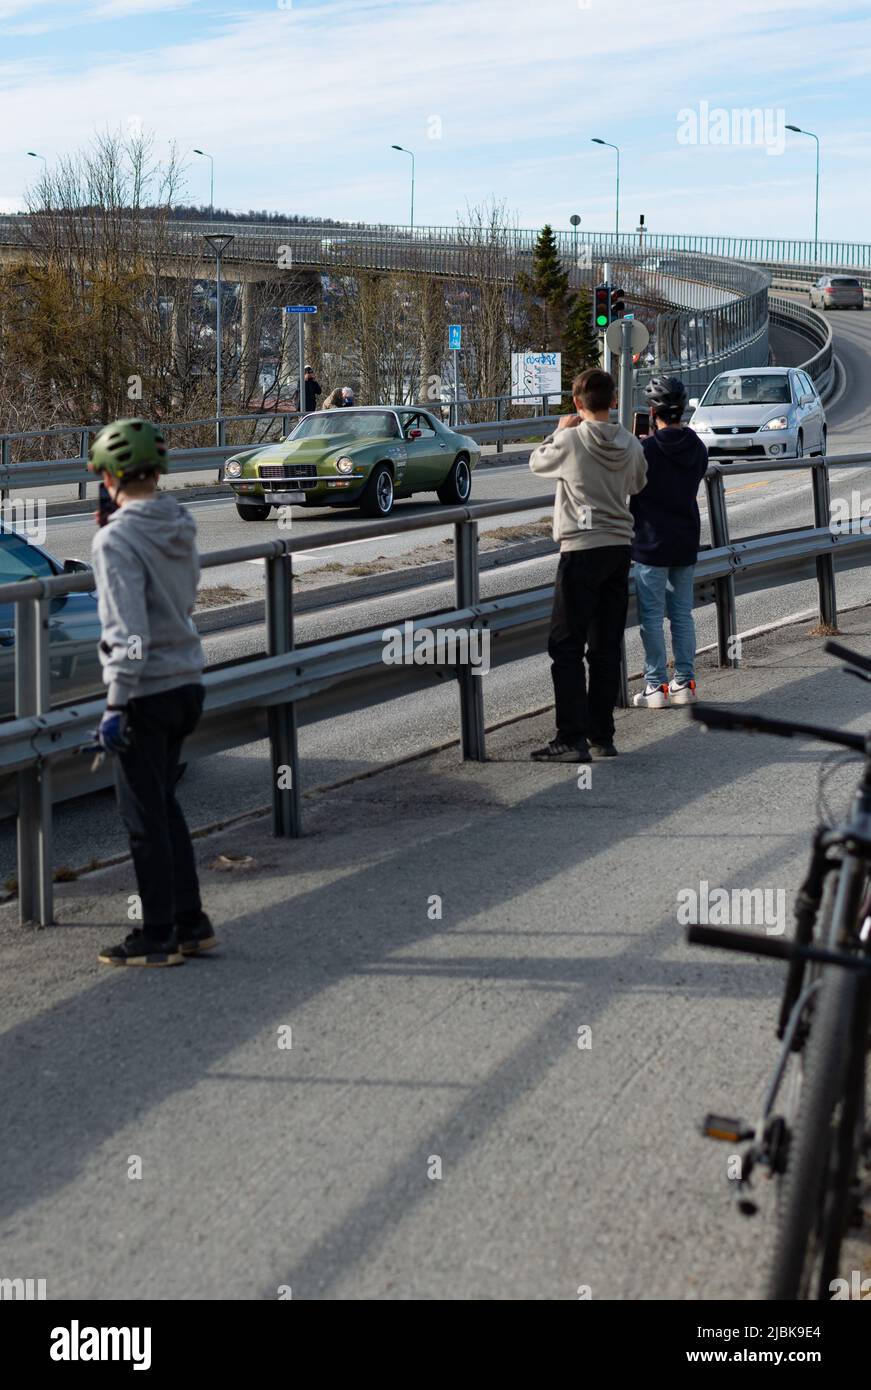 Three boys spotting a veteran chevrolet in Tromsdalen, Tromsø, Norway. They are taking photos with their phones. Their bicycles in the background. Stock Photo